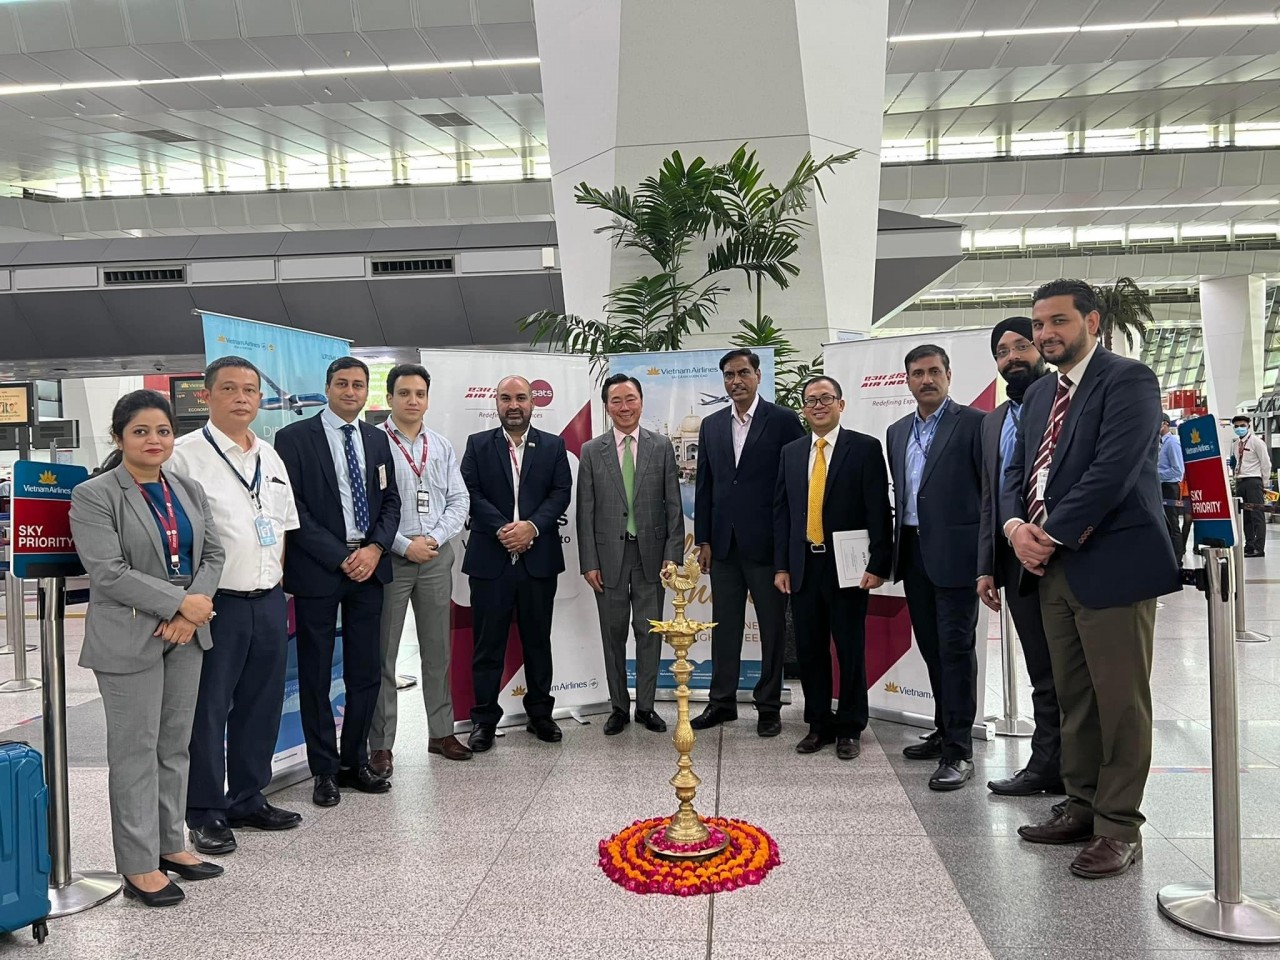 National flag carrier Vietnam Airlines on June 15 officially opened a direct route between Vietnam and India, with its first flight departing from Hanoi and landing at the Indira Gandhi international airport in New Delhi at 2:45pm (local time).